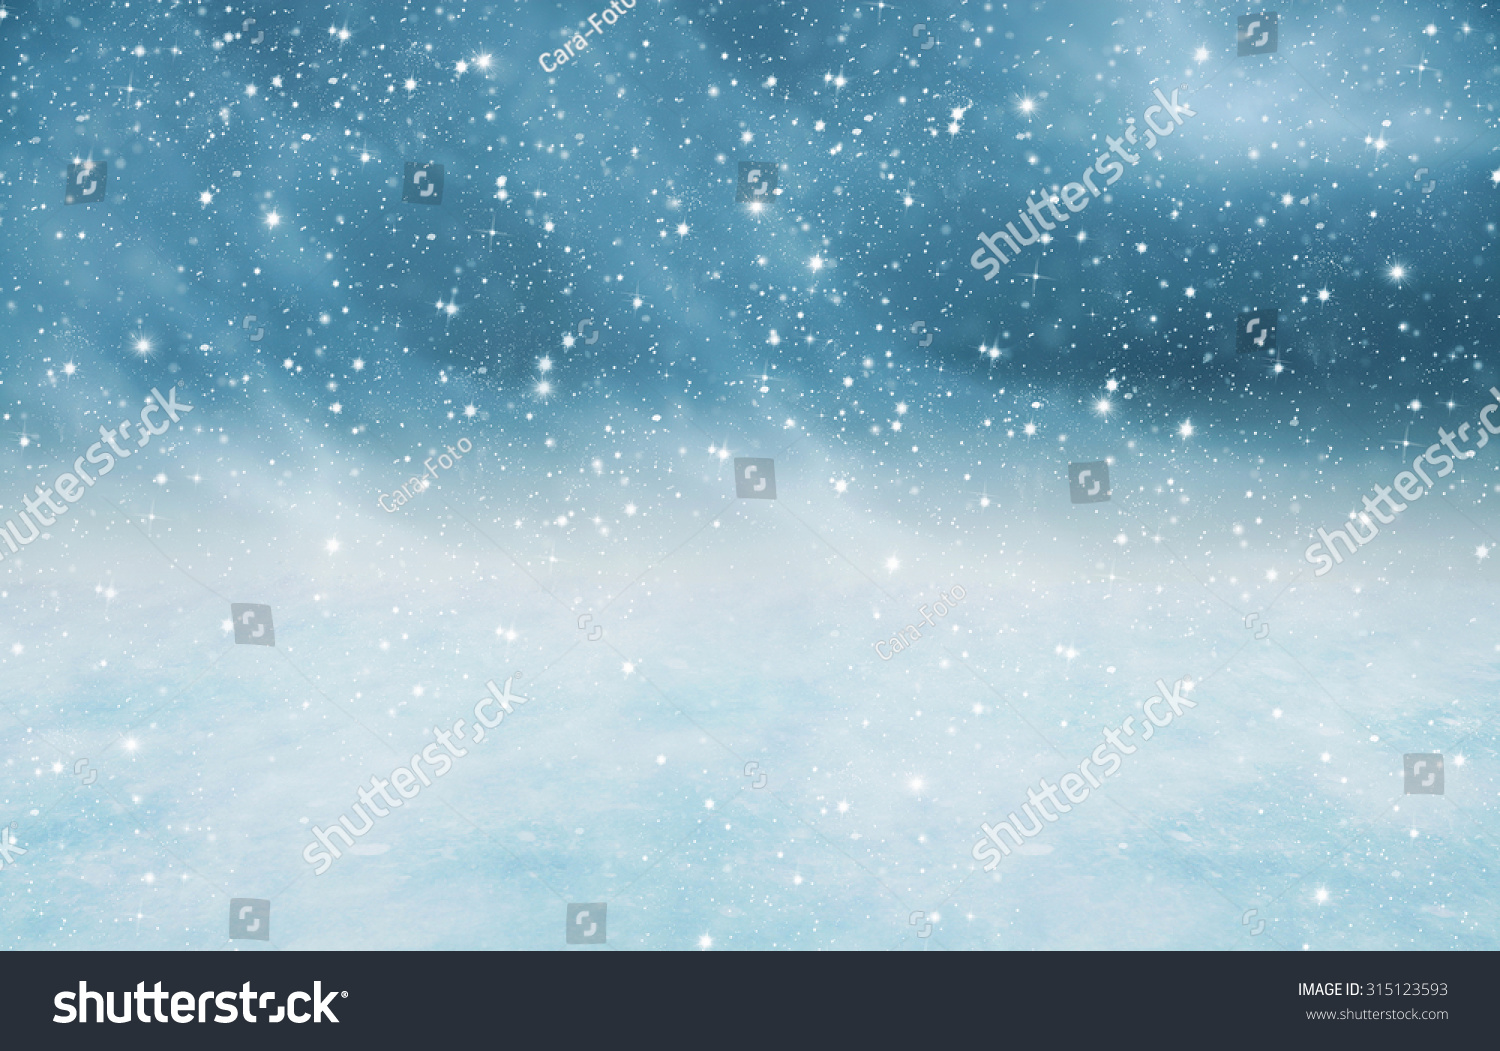 Winter landscape with falling snow #315123593